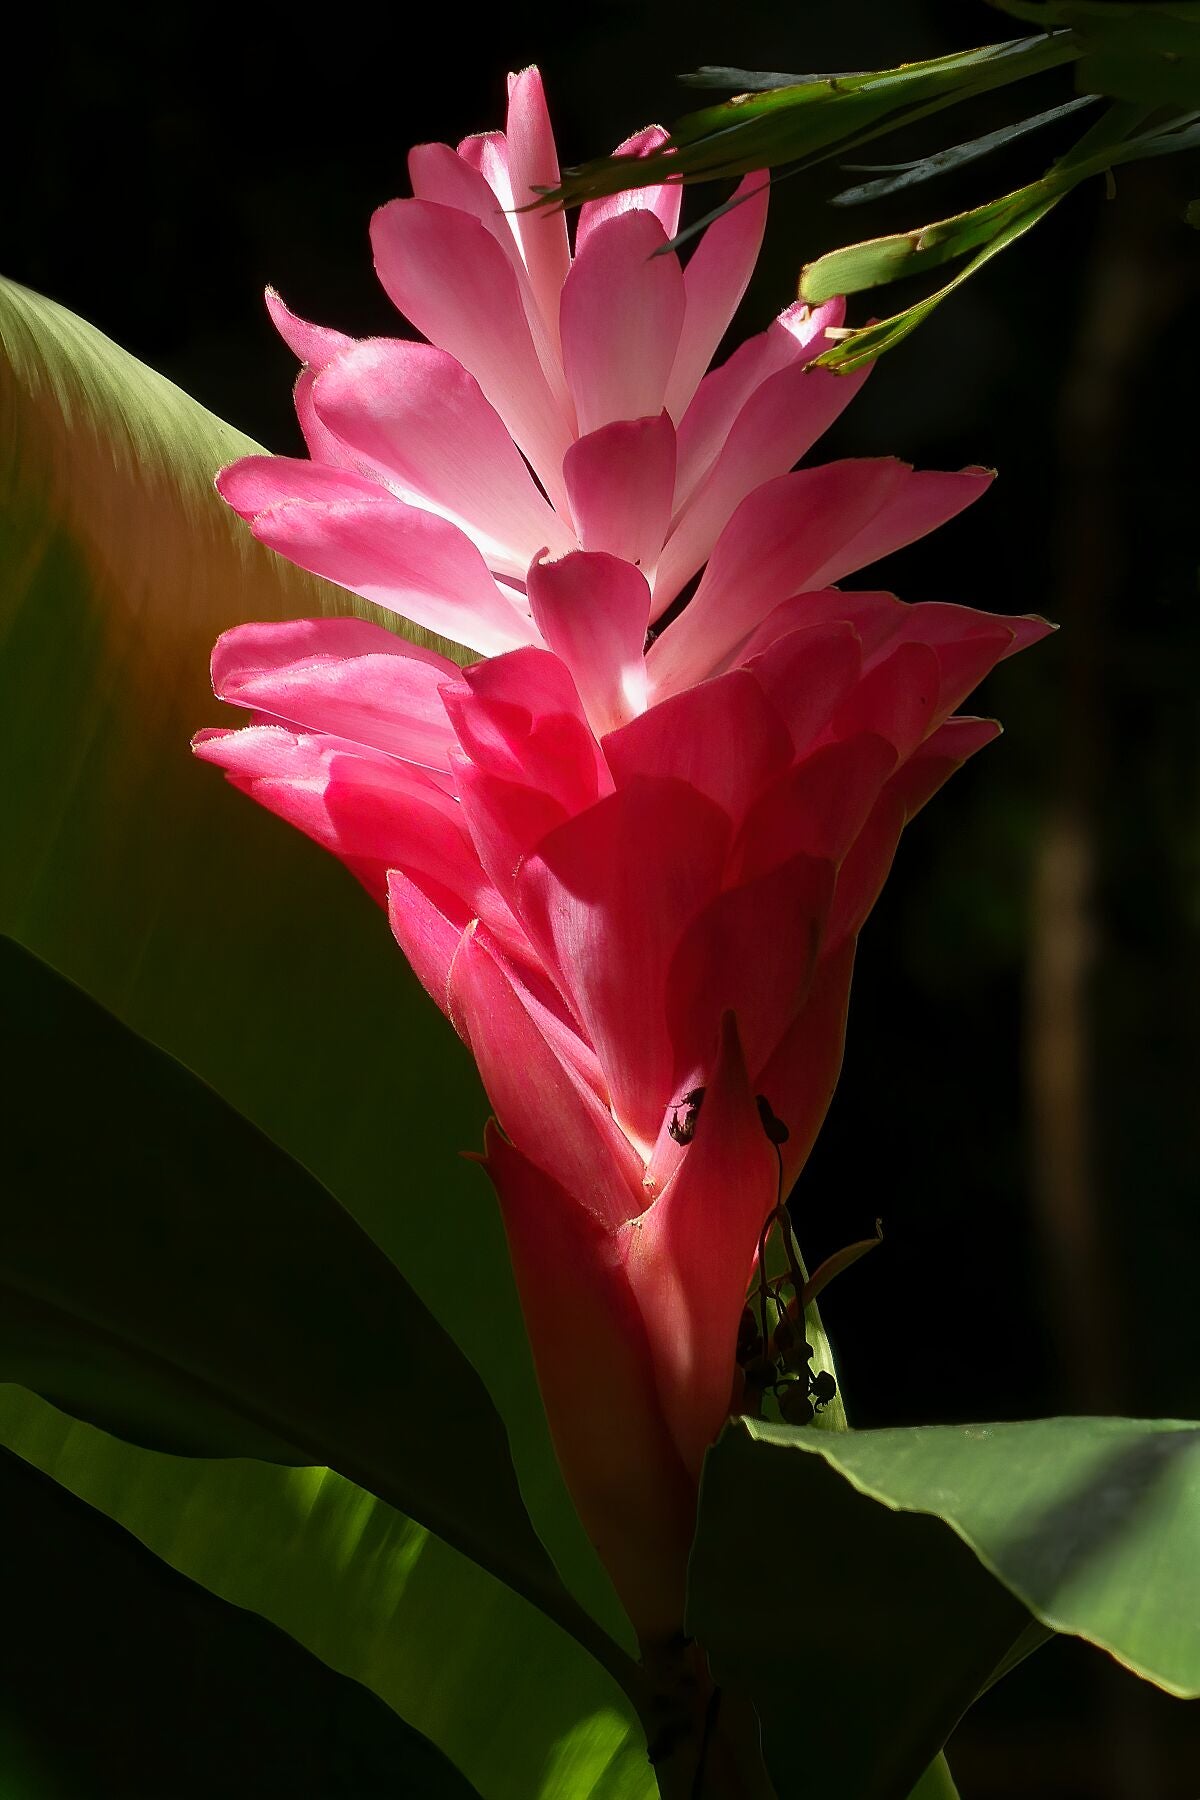 Red and pink Ginger flower playing with sun